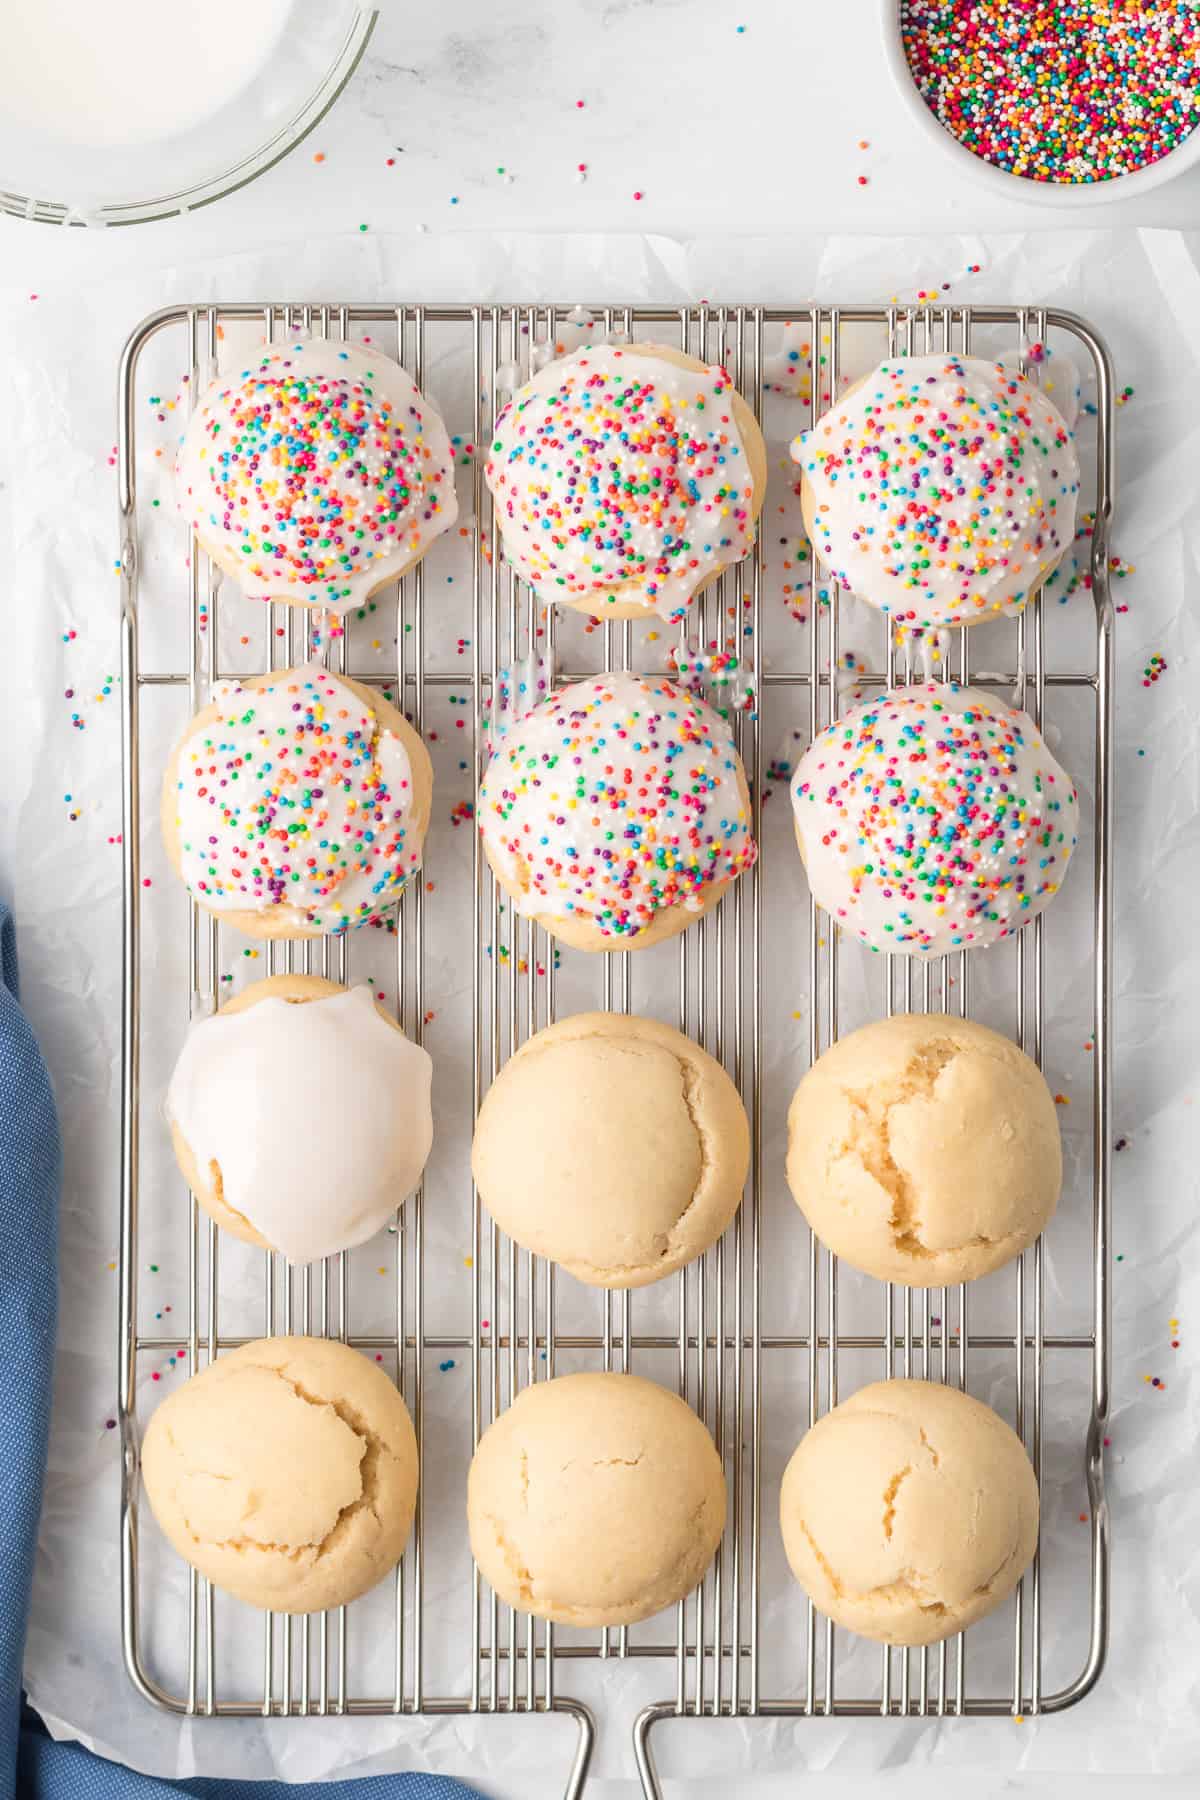 Italian Cookies on a wire rack, some with icing and sprinkles and some plain.